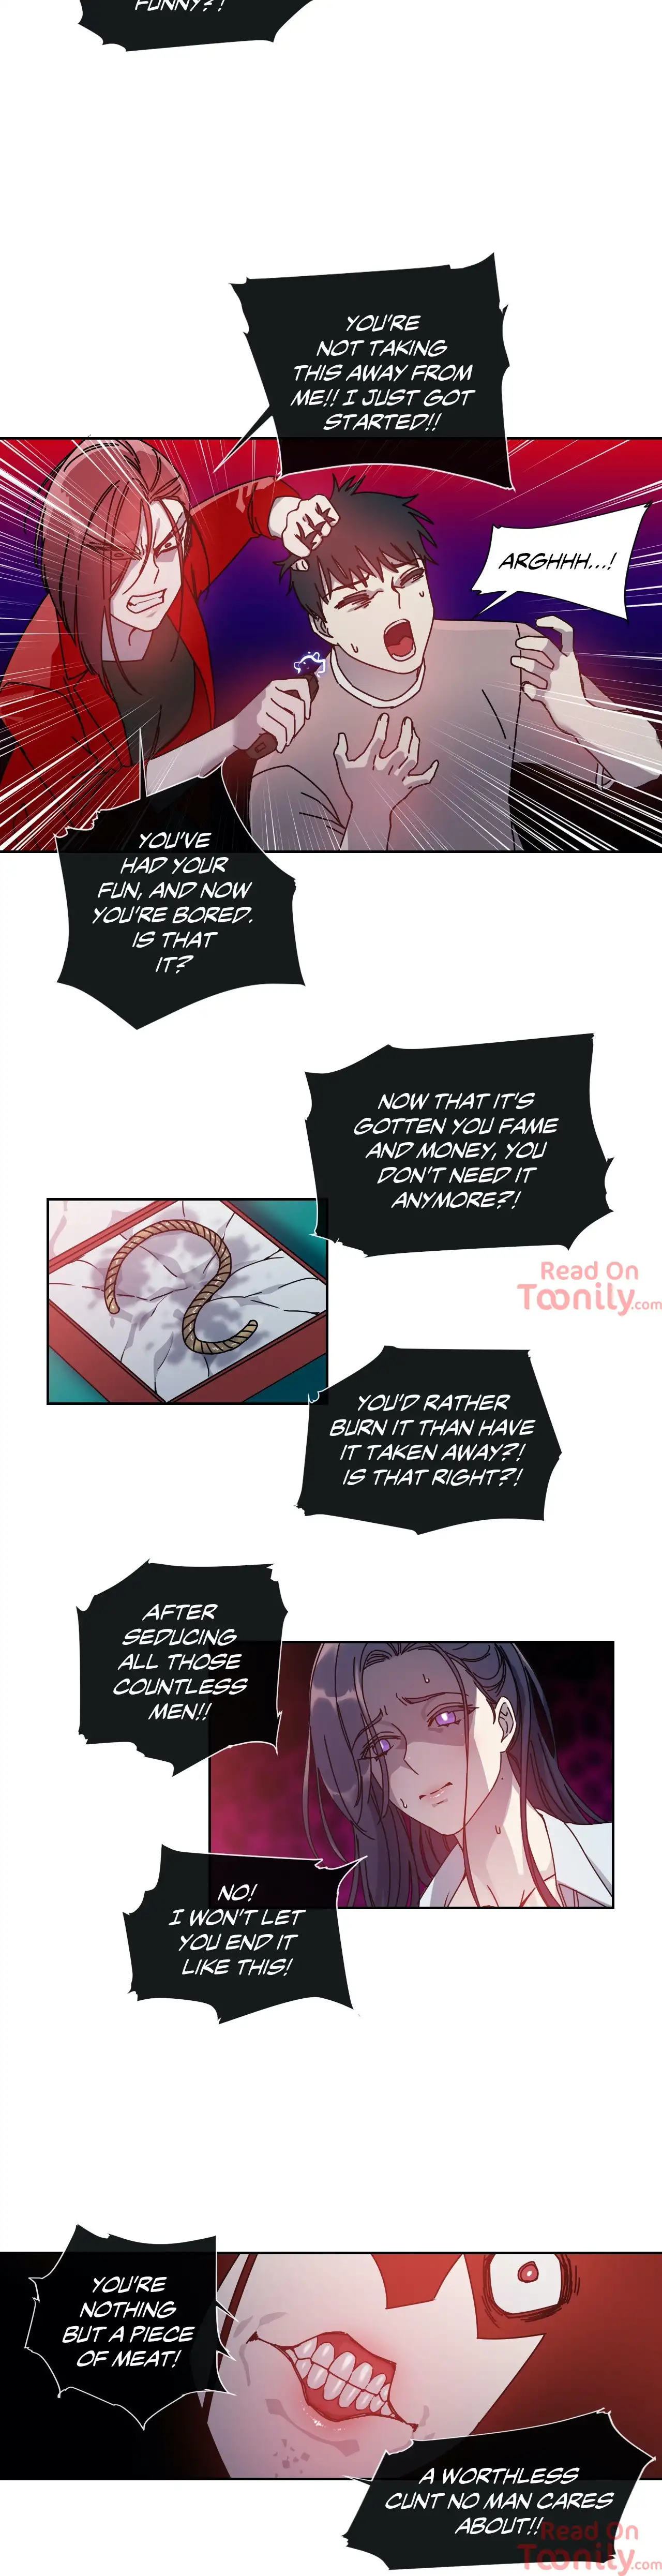 Tie Me Up! - Chapter 52 Page 15